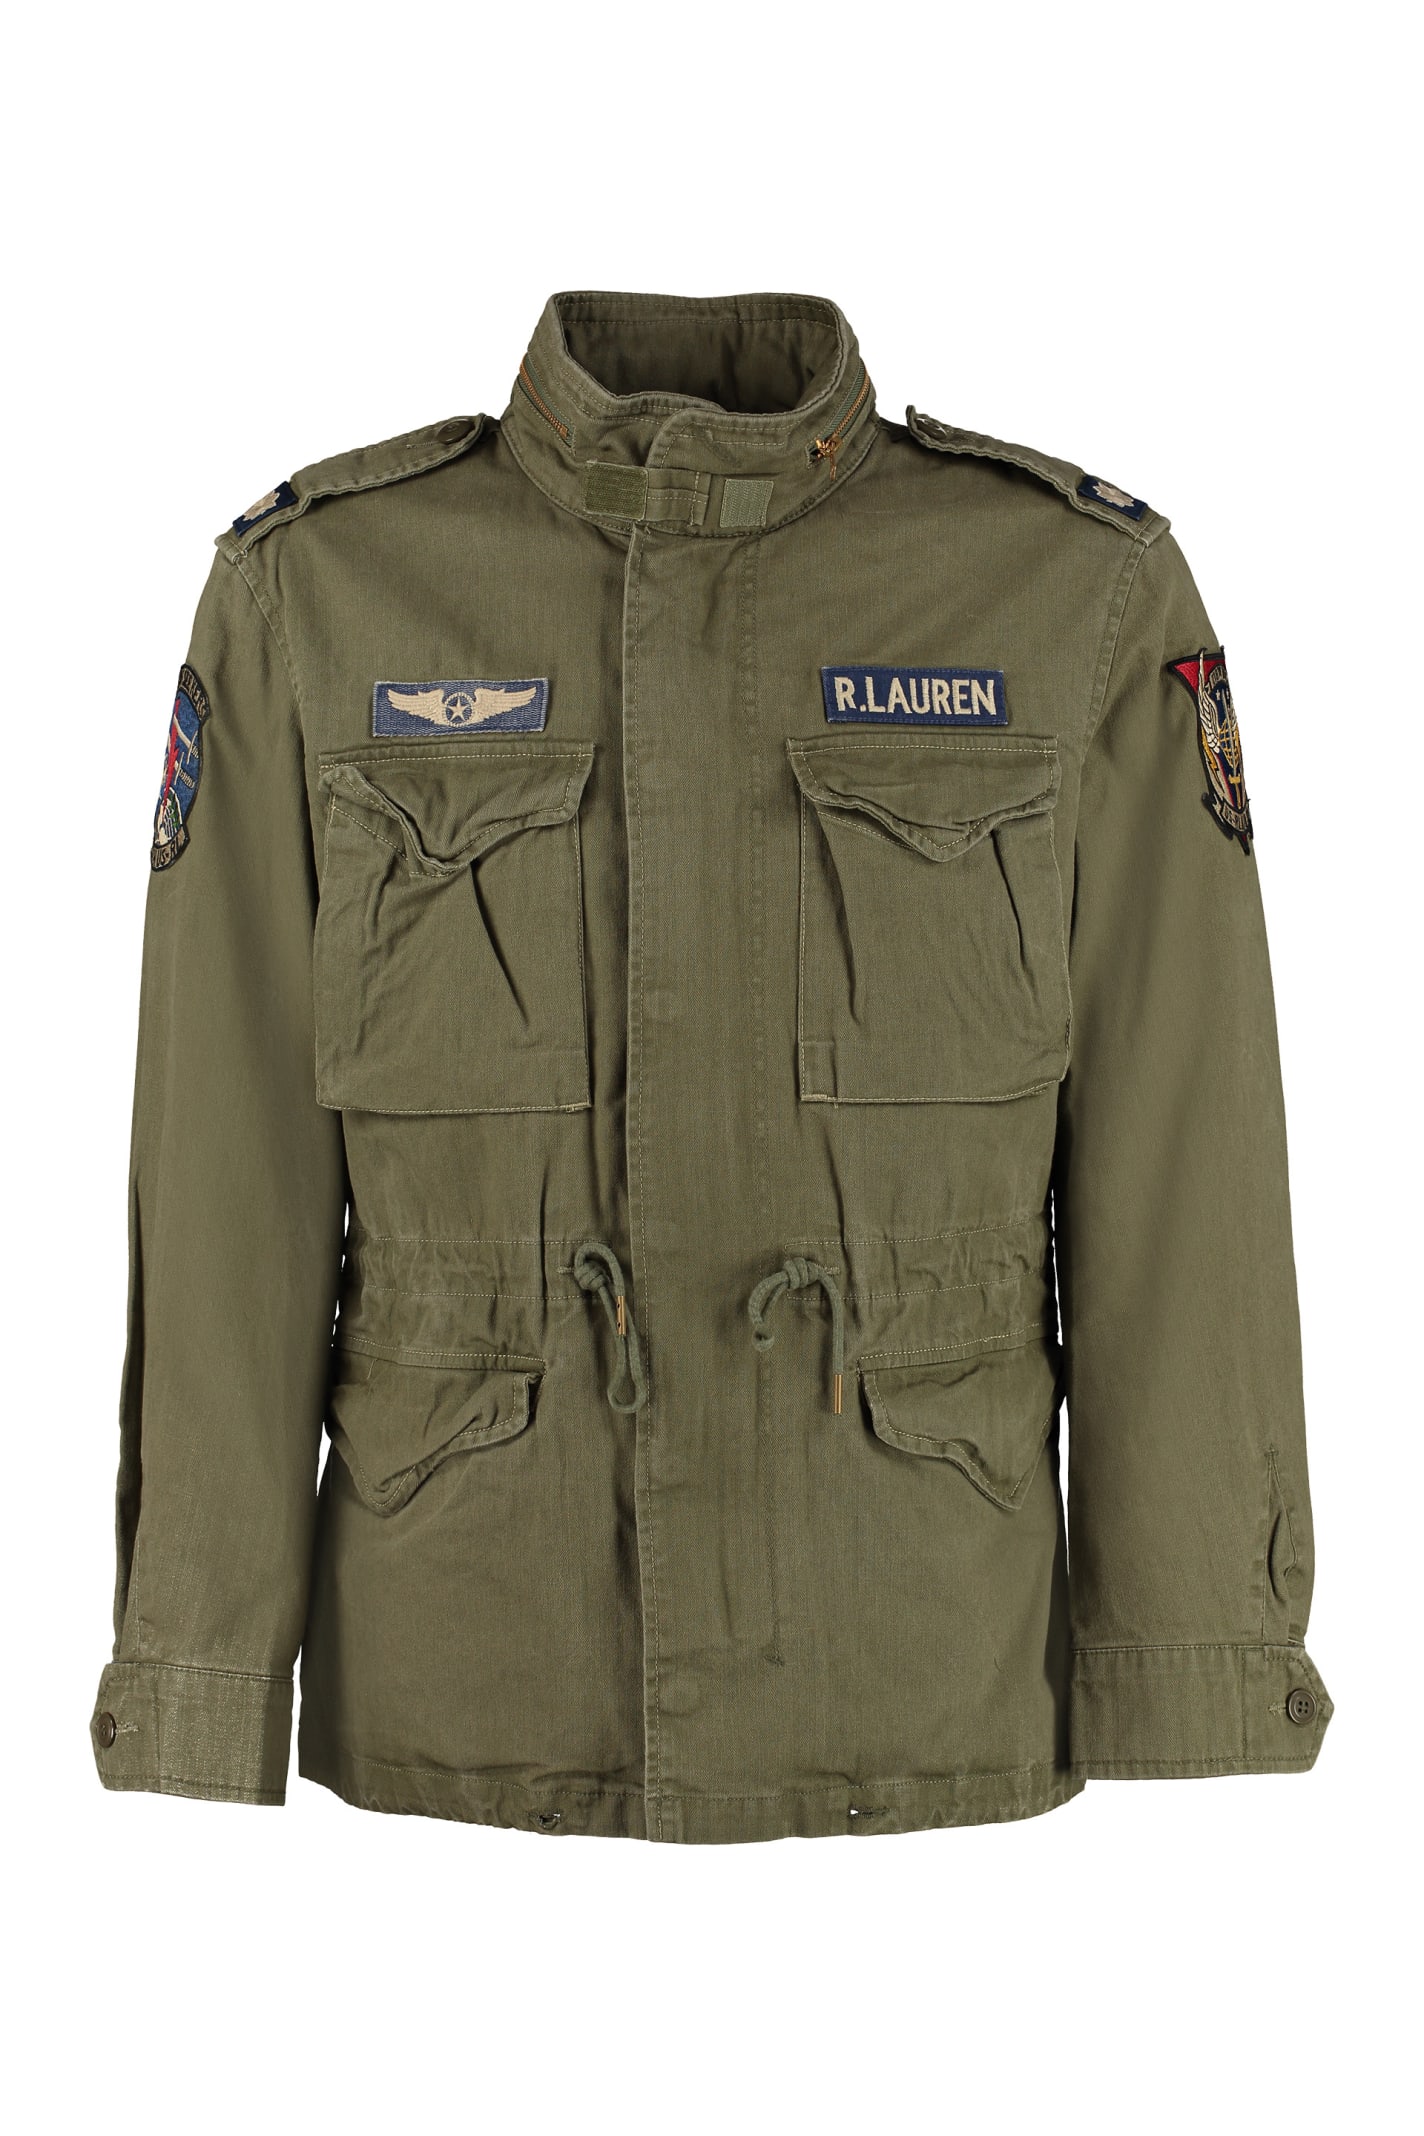 ralph lauren army jacket with patches